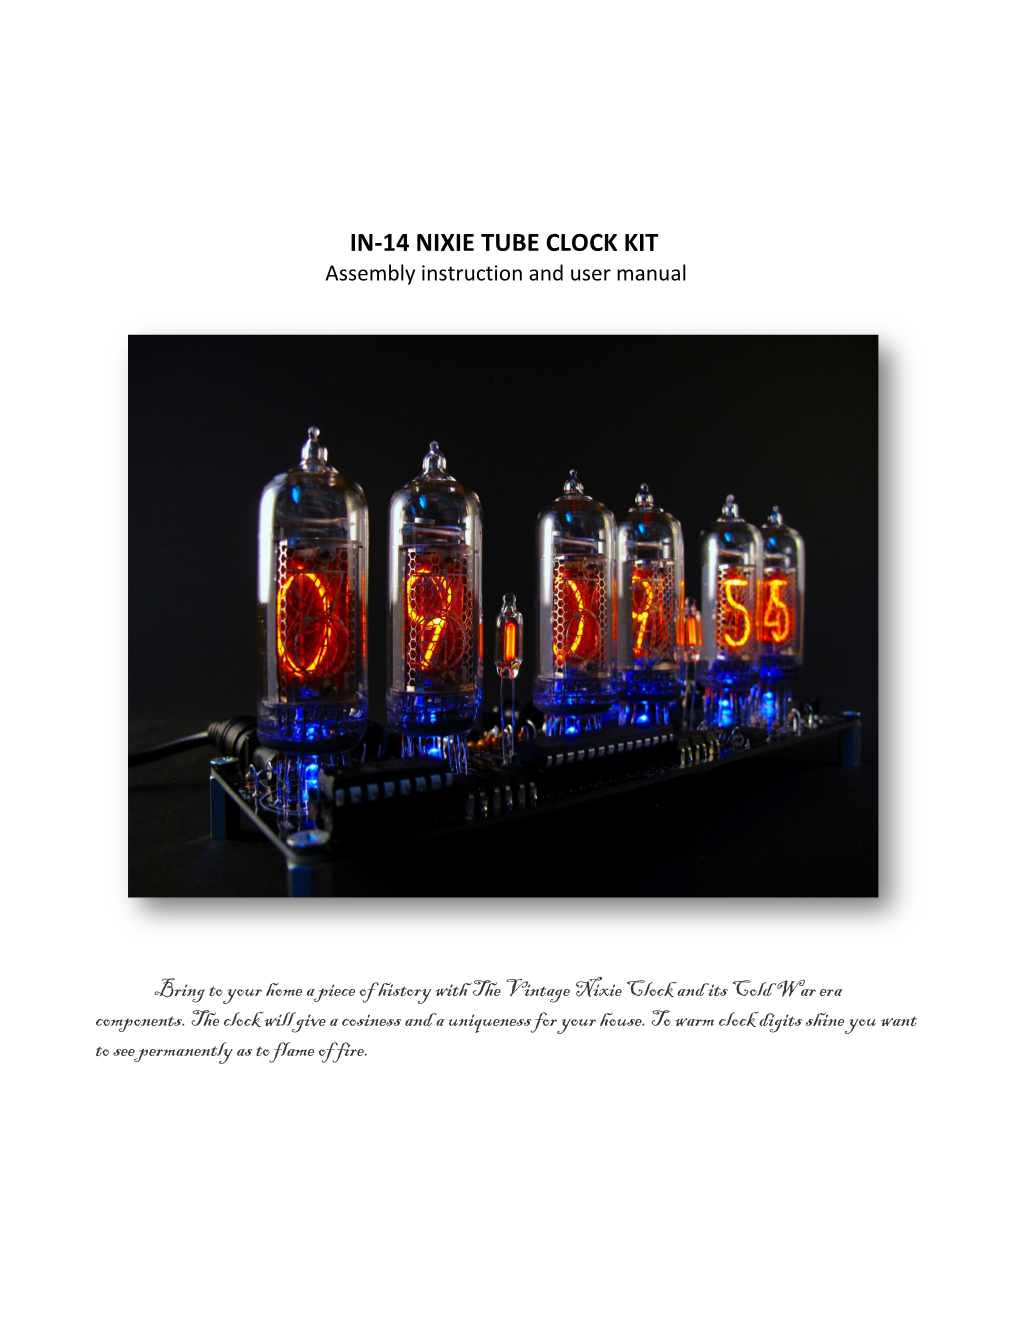 IN-14 NIXIE TUBE CLOCK KIT Assembly Instruction and User Manual